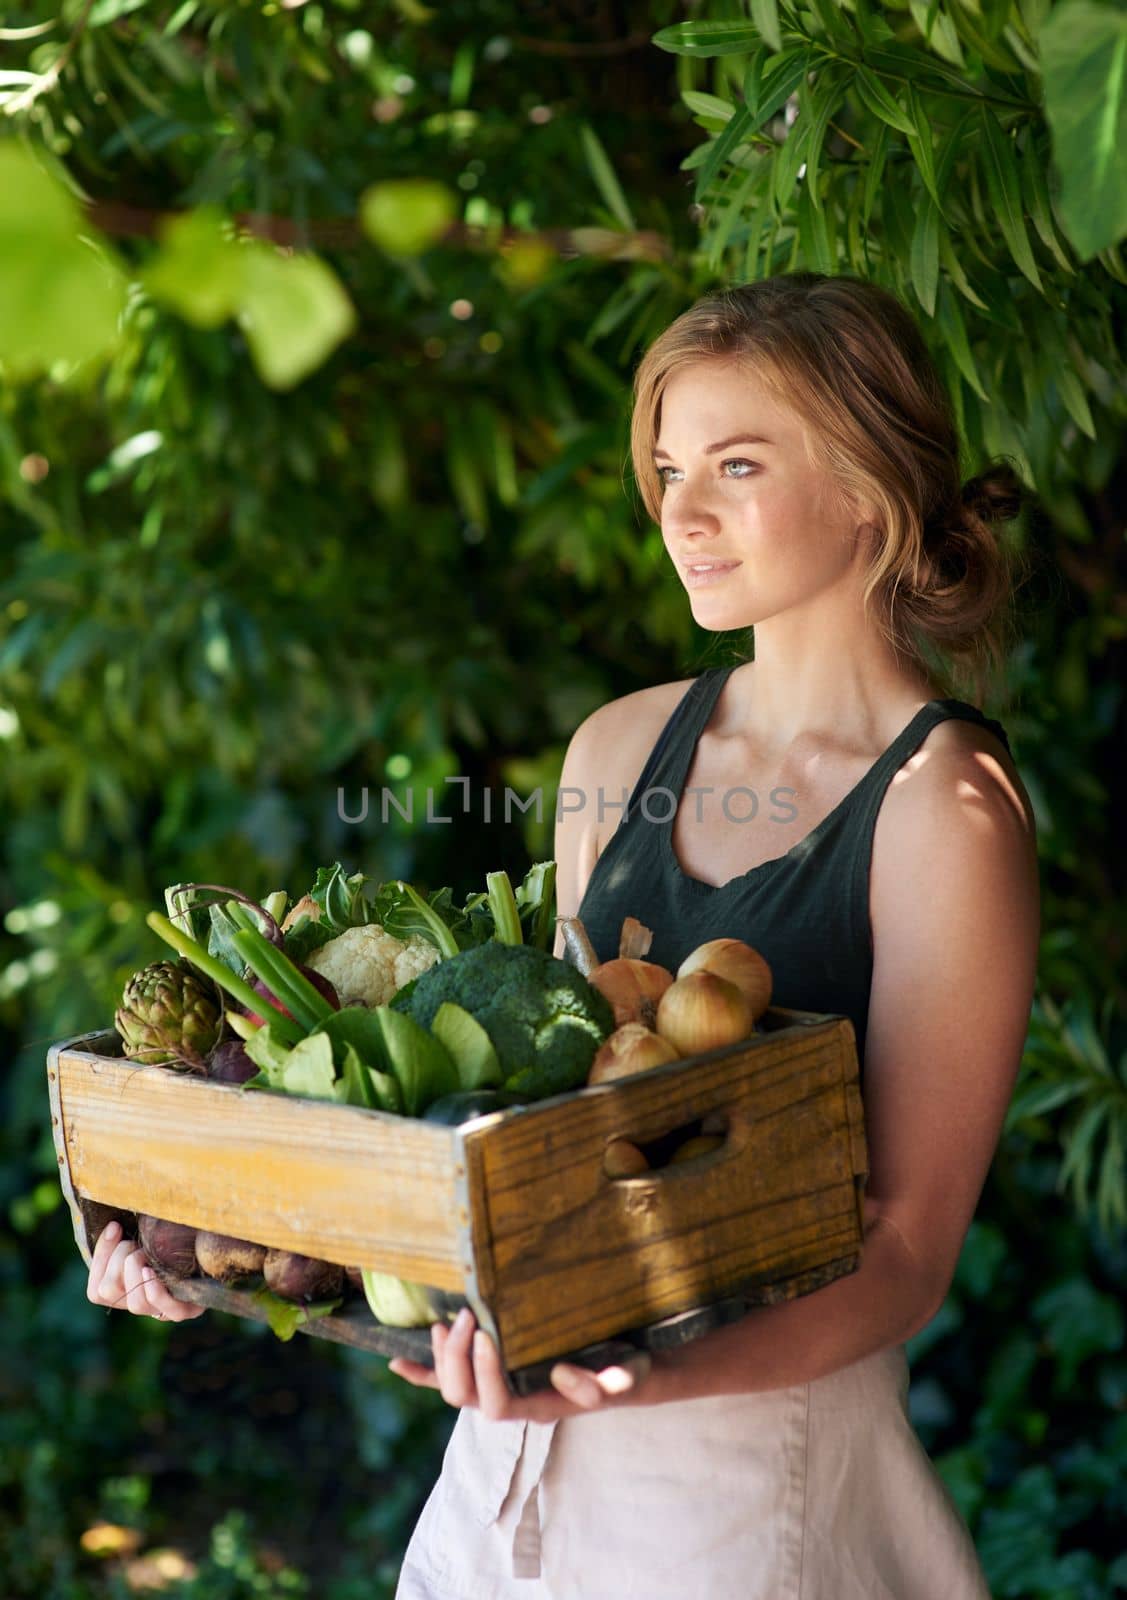 Shes down to earth. A young woman holding a crate of vegetables outdoors. by YuriArcurs